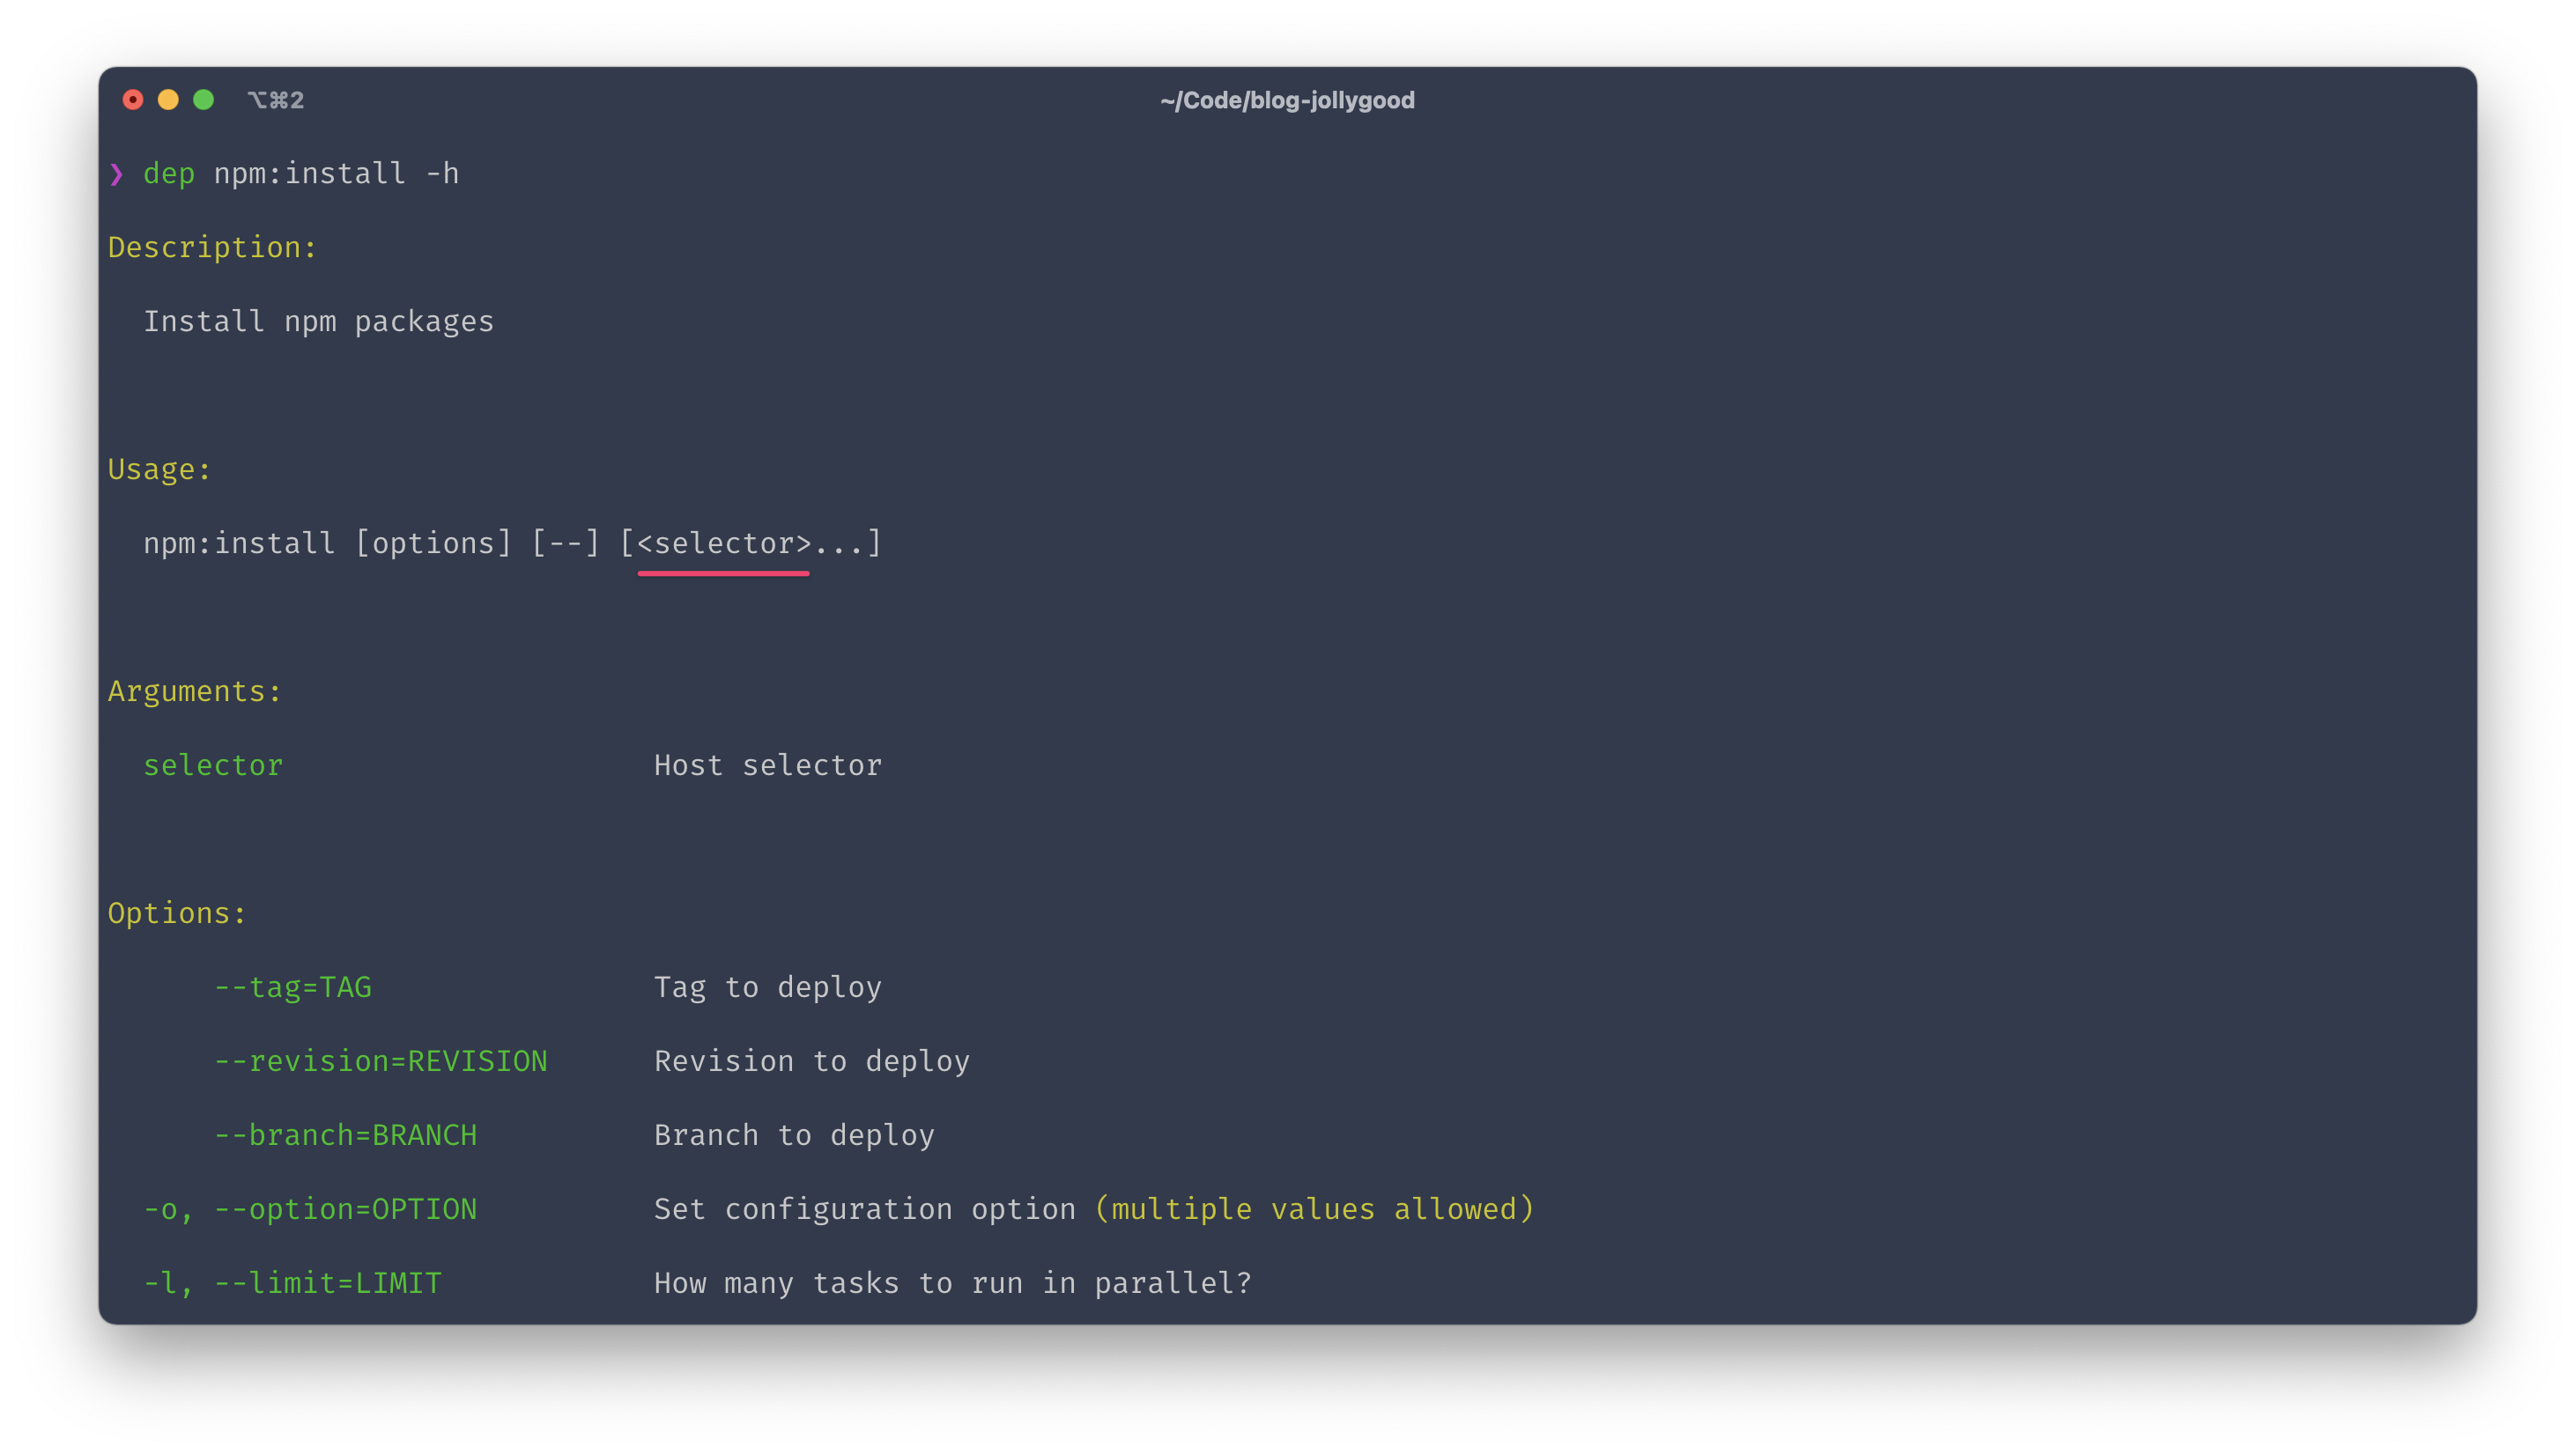 Screenshot of the terminal output for &quot;dep npm:install -h&quot; showing the help page of the task. The usage section shows: npm:install [options] [--] [&lt;selector&gt;…].